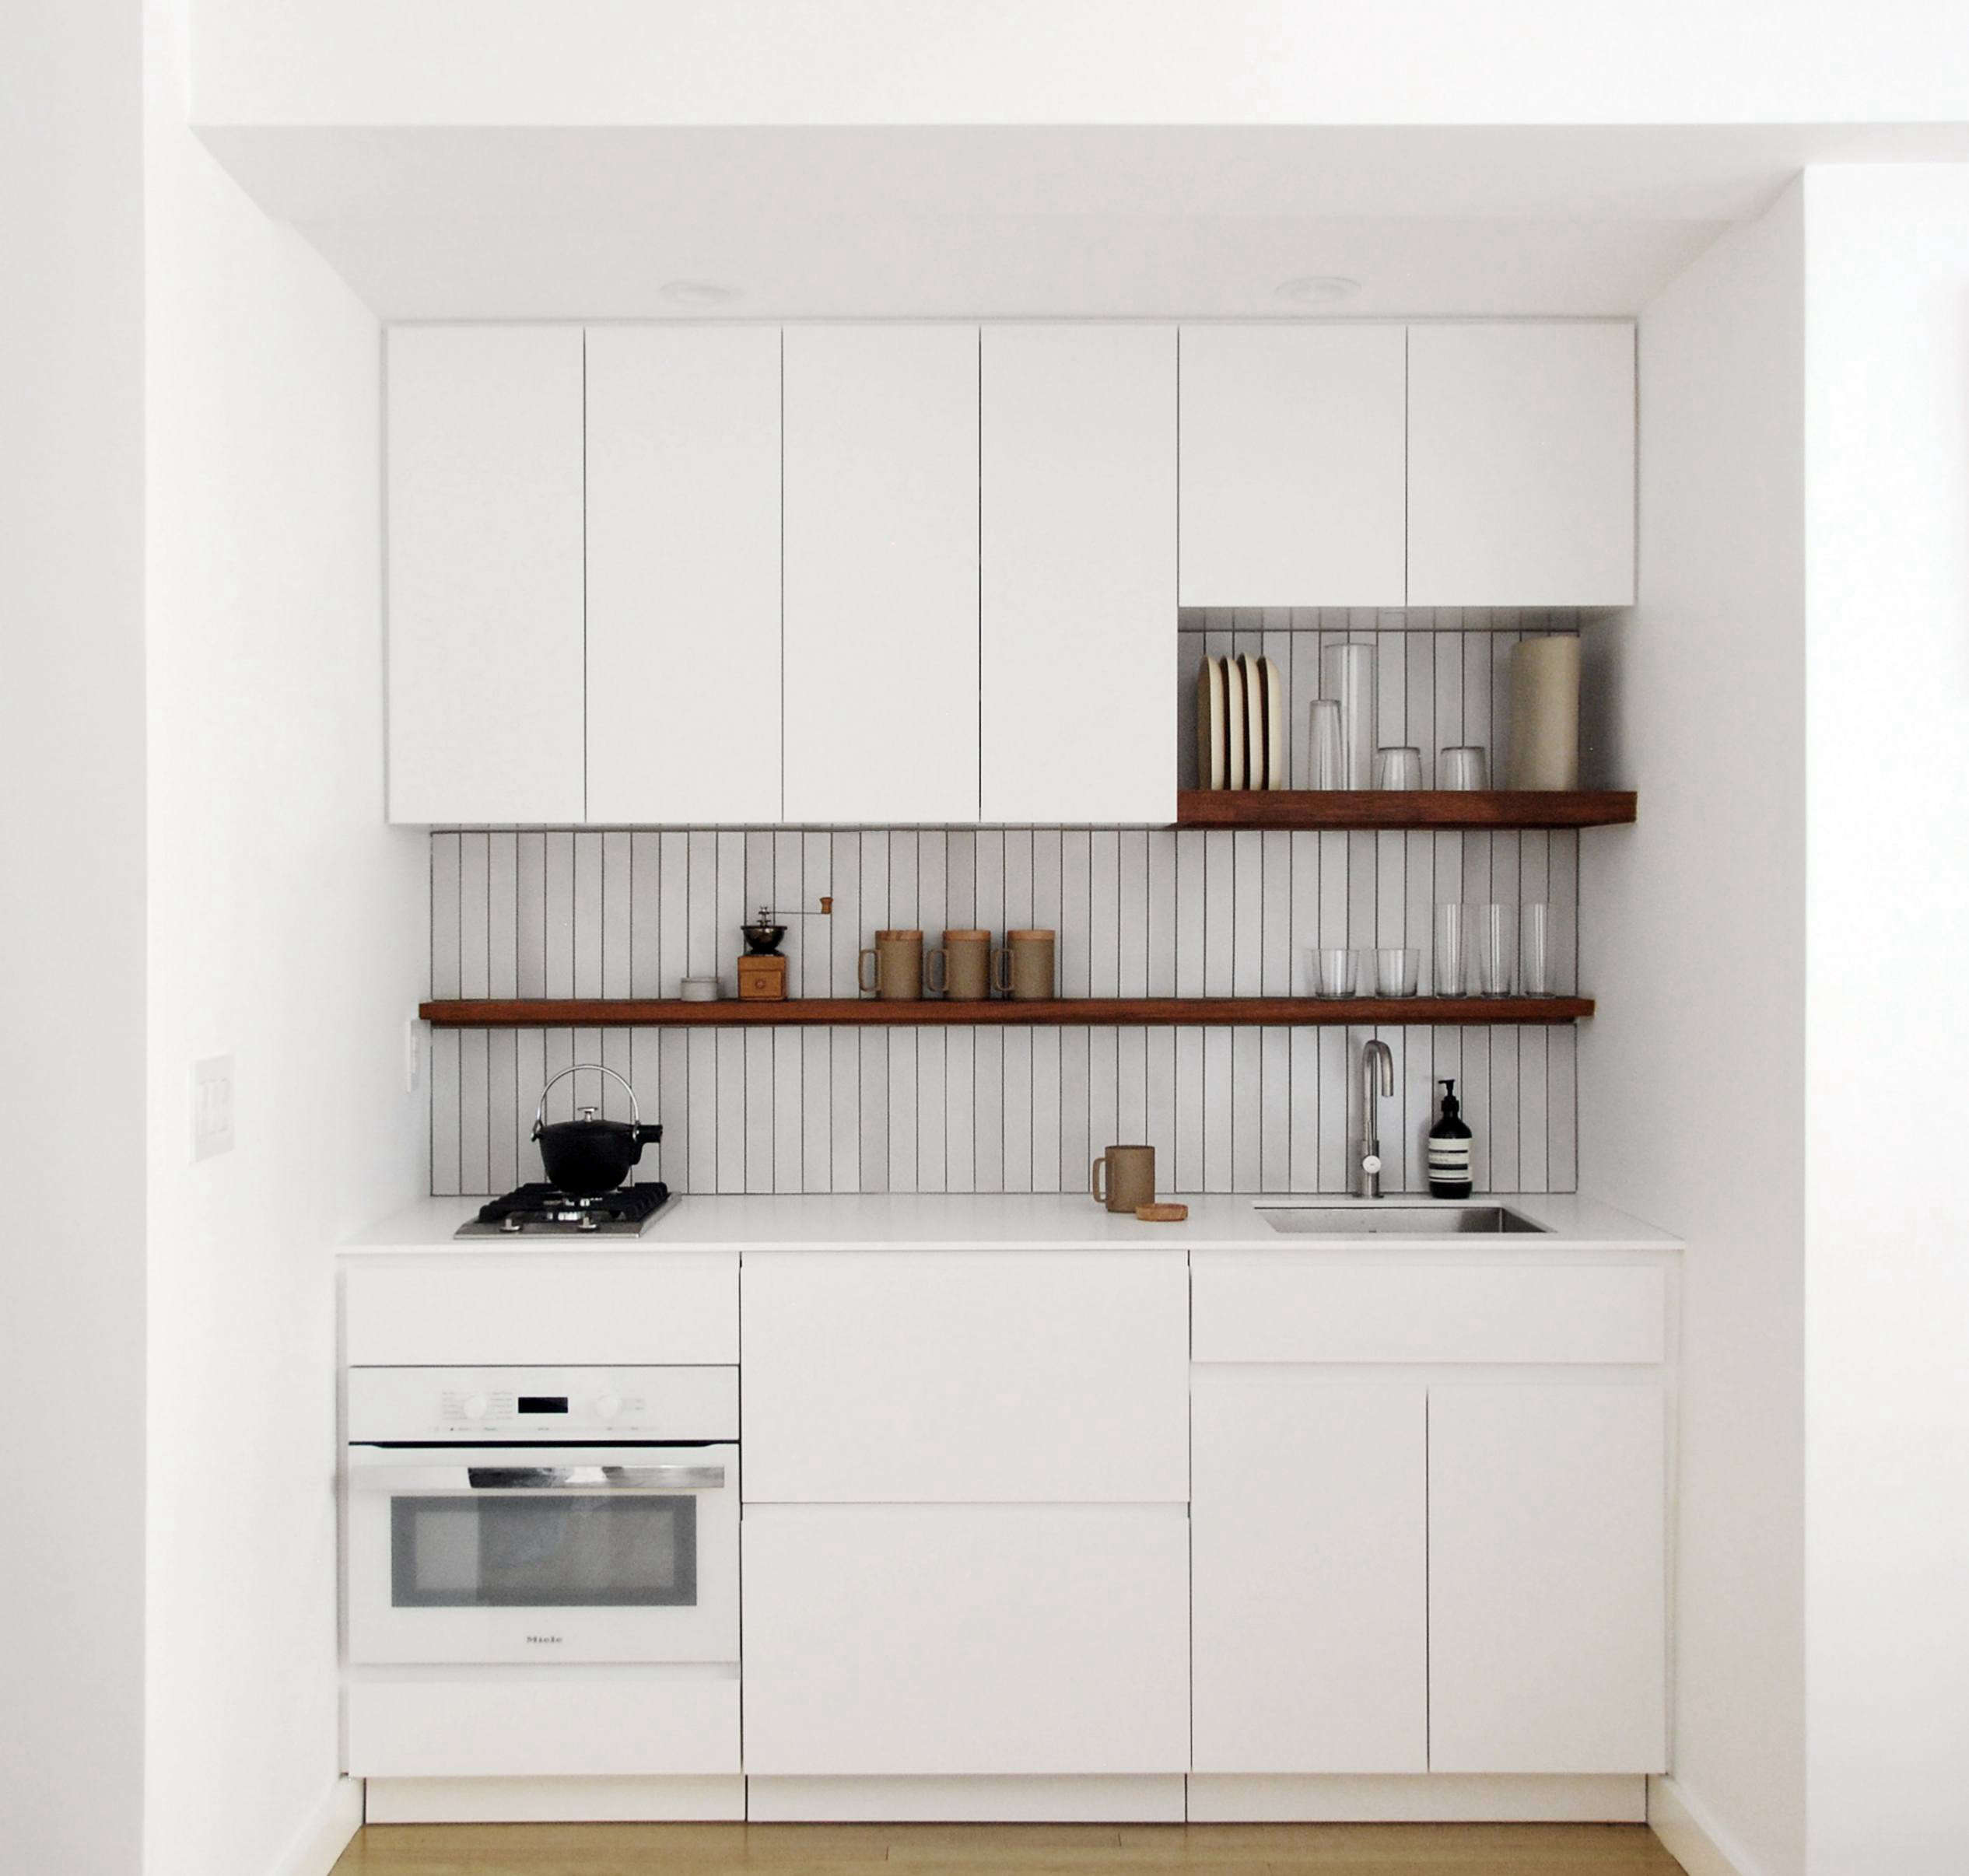 Compact kitchen solutions for very small spaces